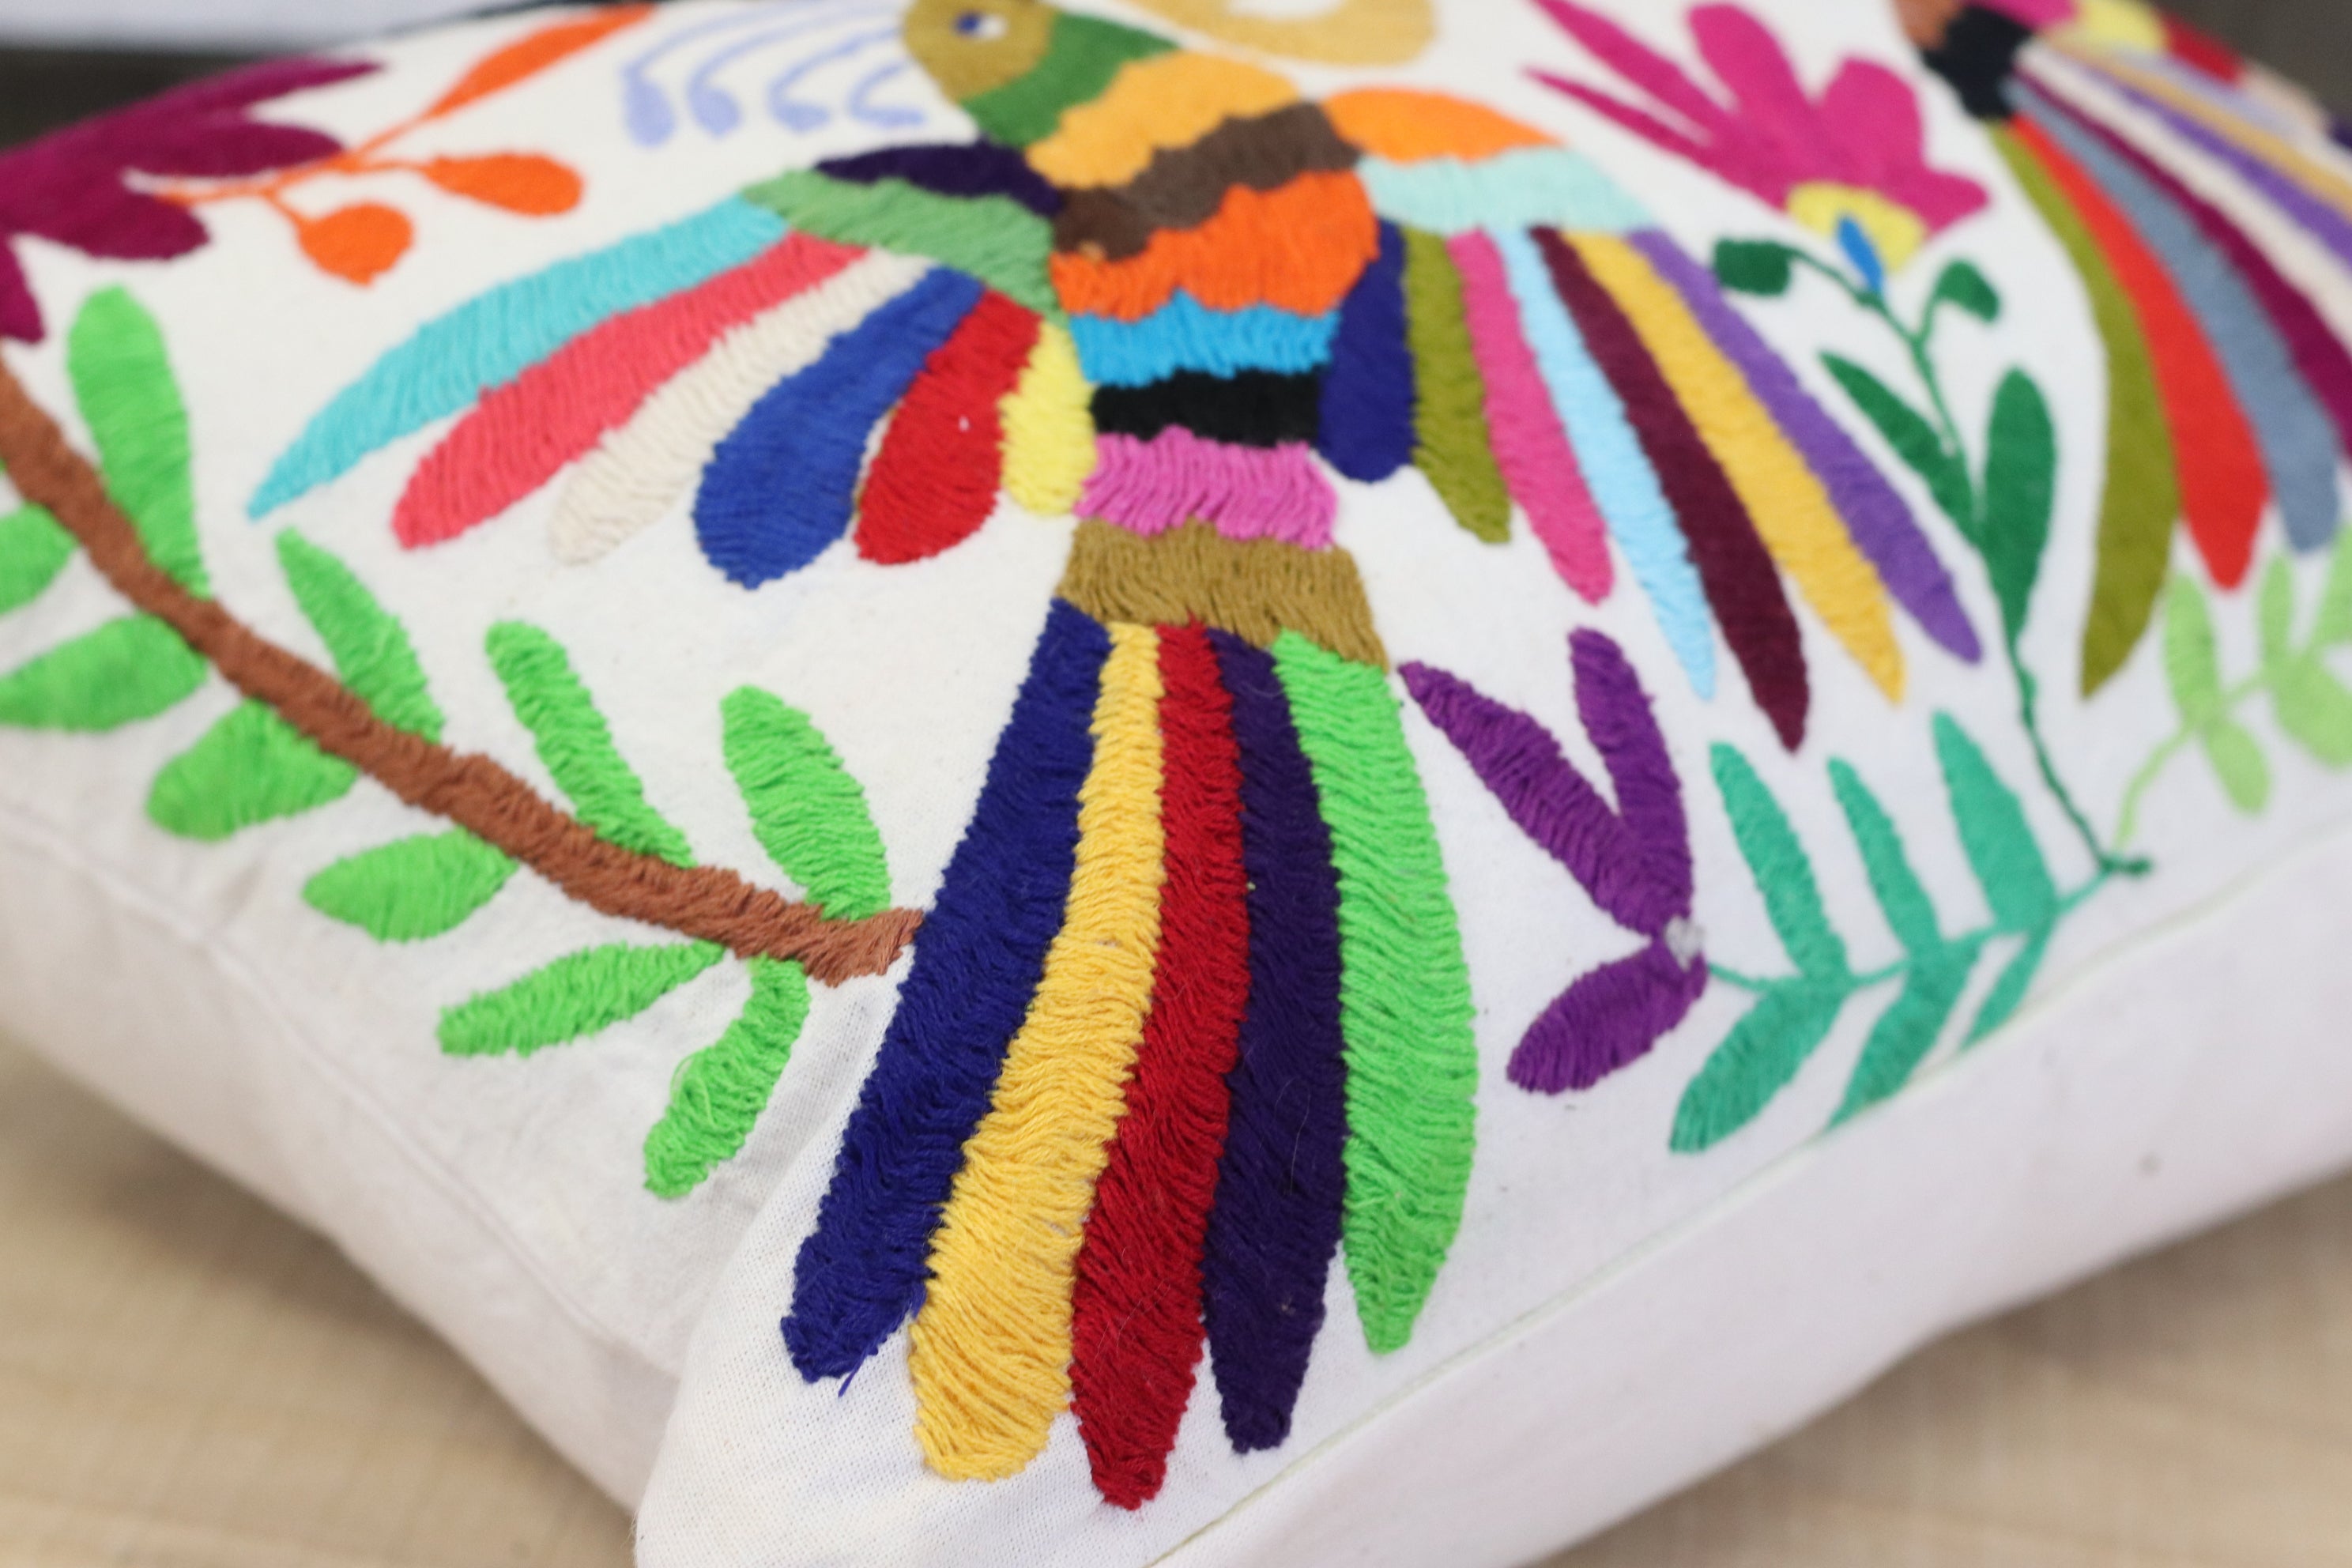 Rectangle Otomi Tenango Pillow Cover with Hand Embroidered Butterfly, Bird and Flower Design in Vibrant Colors. Handmade in Mexico. Ships from the USA. Buy now at www.felipeandgrace.com.